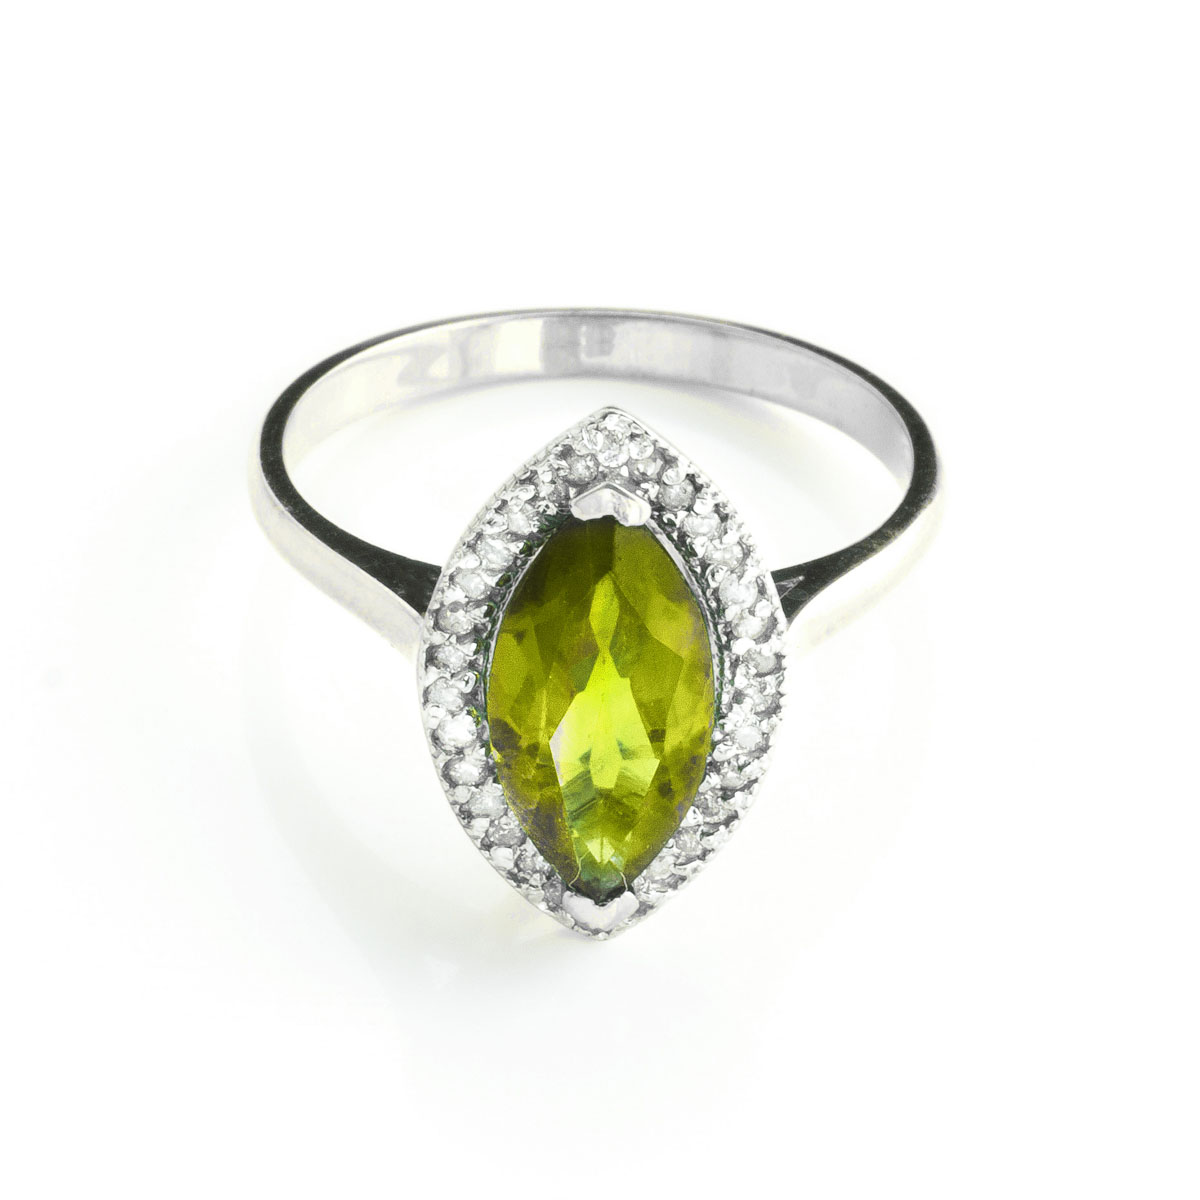 Peridot Halo Ring 2.15 ctw in Sterling Silver